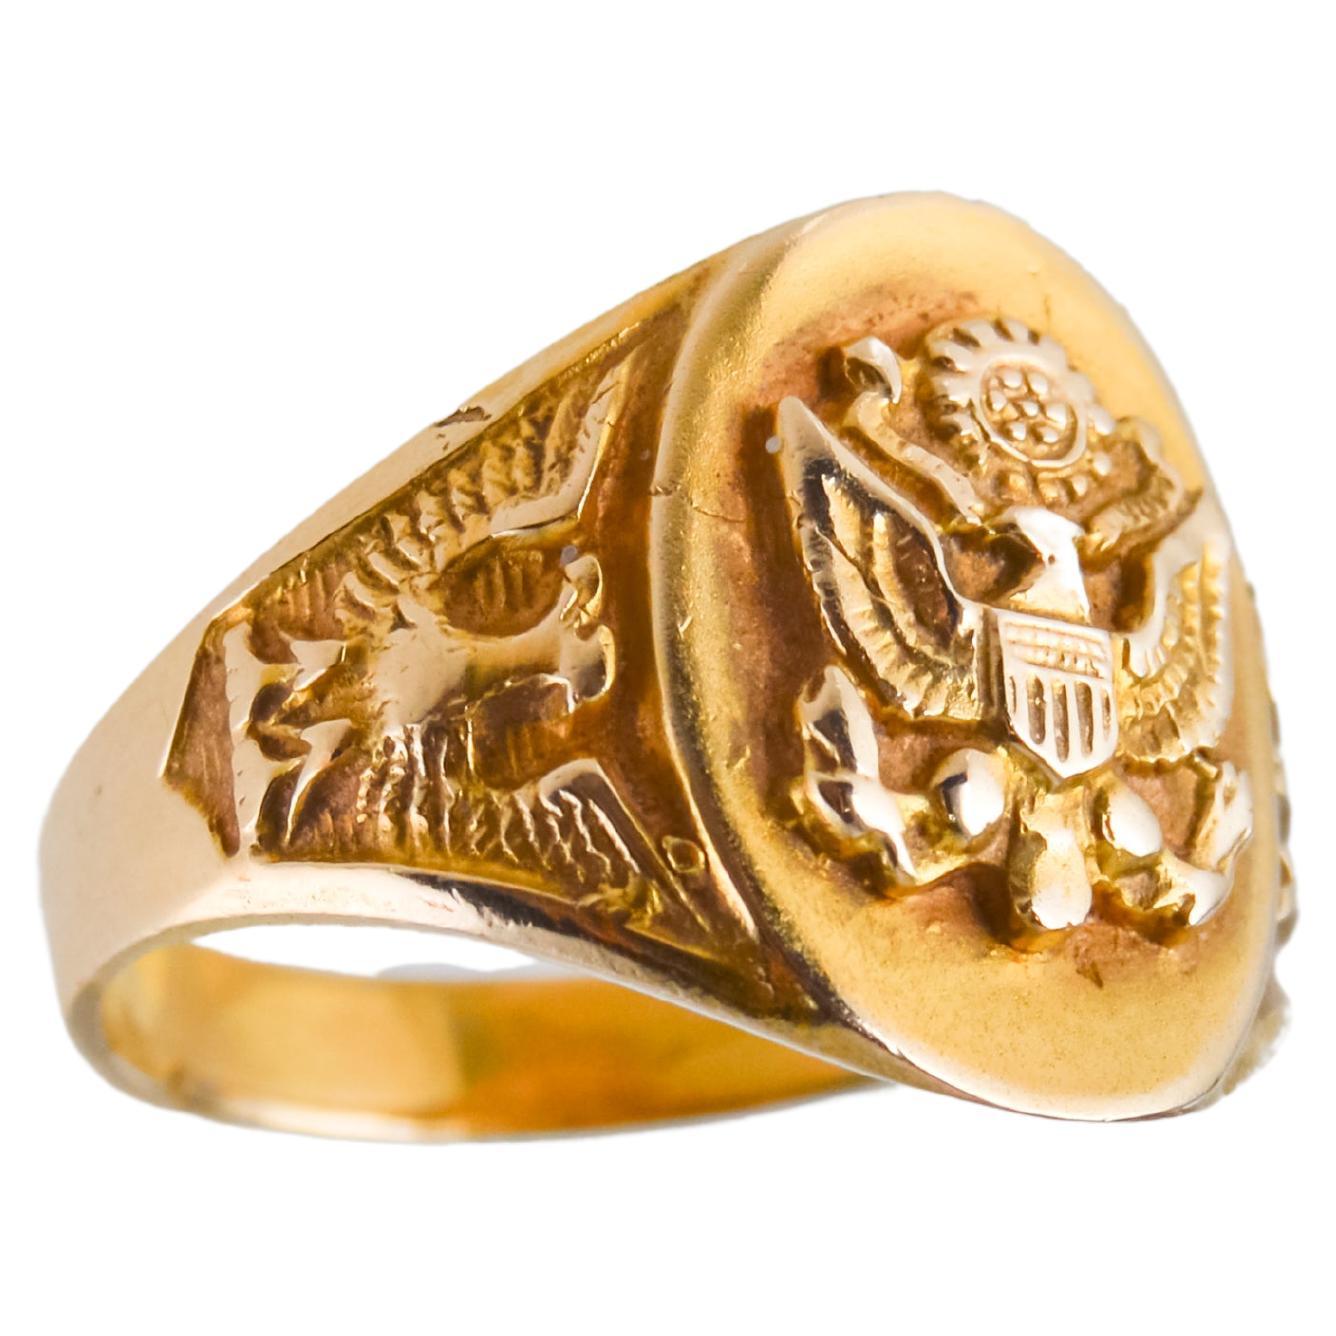 UNISEX RING
STYLE / REFERENCE: Art Deco
METAL / MATERIAL: 10Kt. Solid Yellow Gold 
CIRCA / YEAR: 1940's
SIZE: 6 

 
This Art Deco ring is entirely hand constructed in 10Kt. yellow gold. The ring is hand made and decorated with U.S. Military